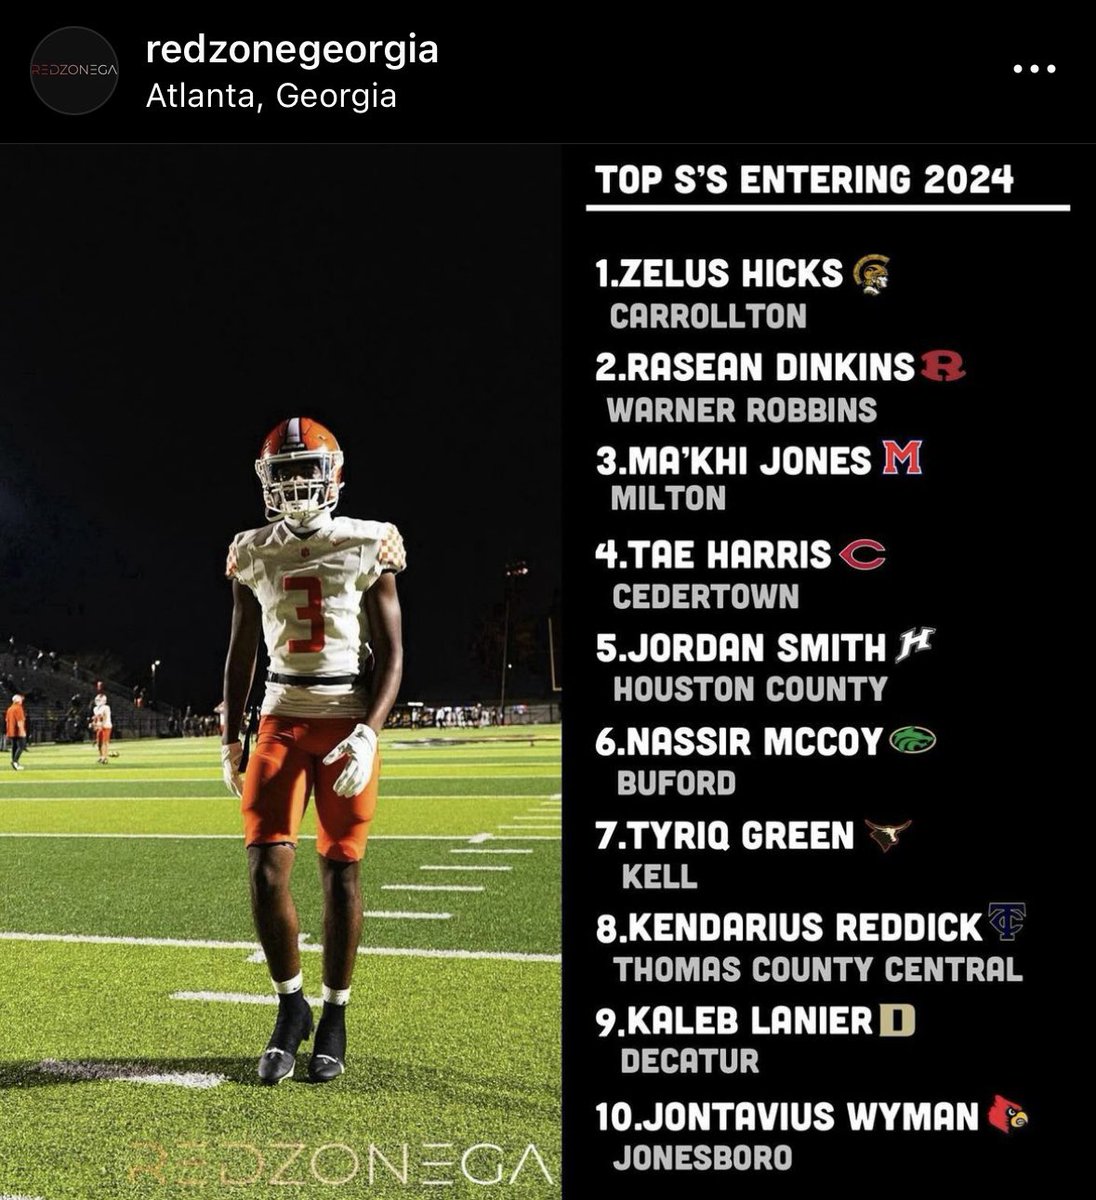 Blessed to be recognized by @redzonega I really play corner but I can do it all in the secondary. Where ever the team needs me I’m good. #TeamFirst looking forward to a big 2024 season!